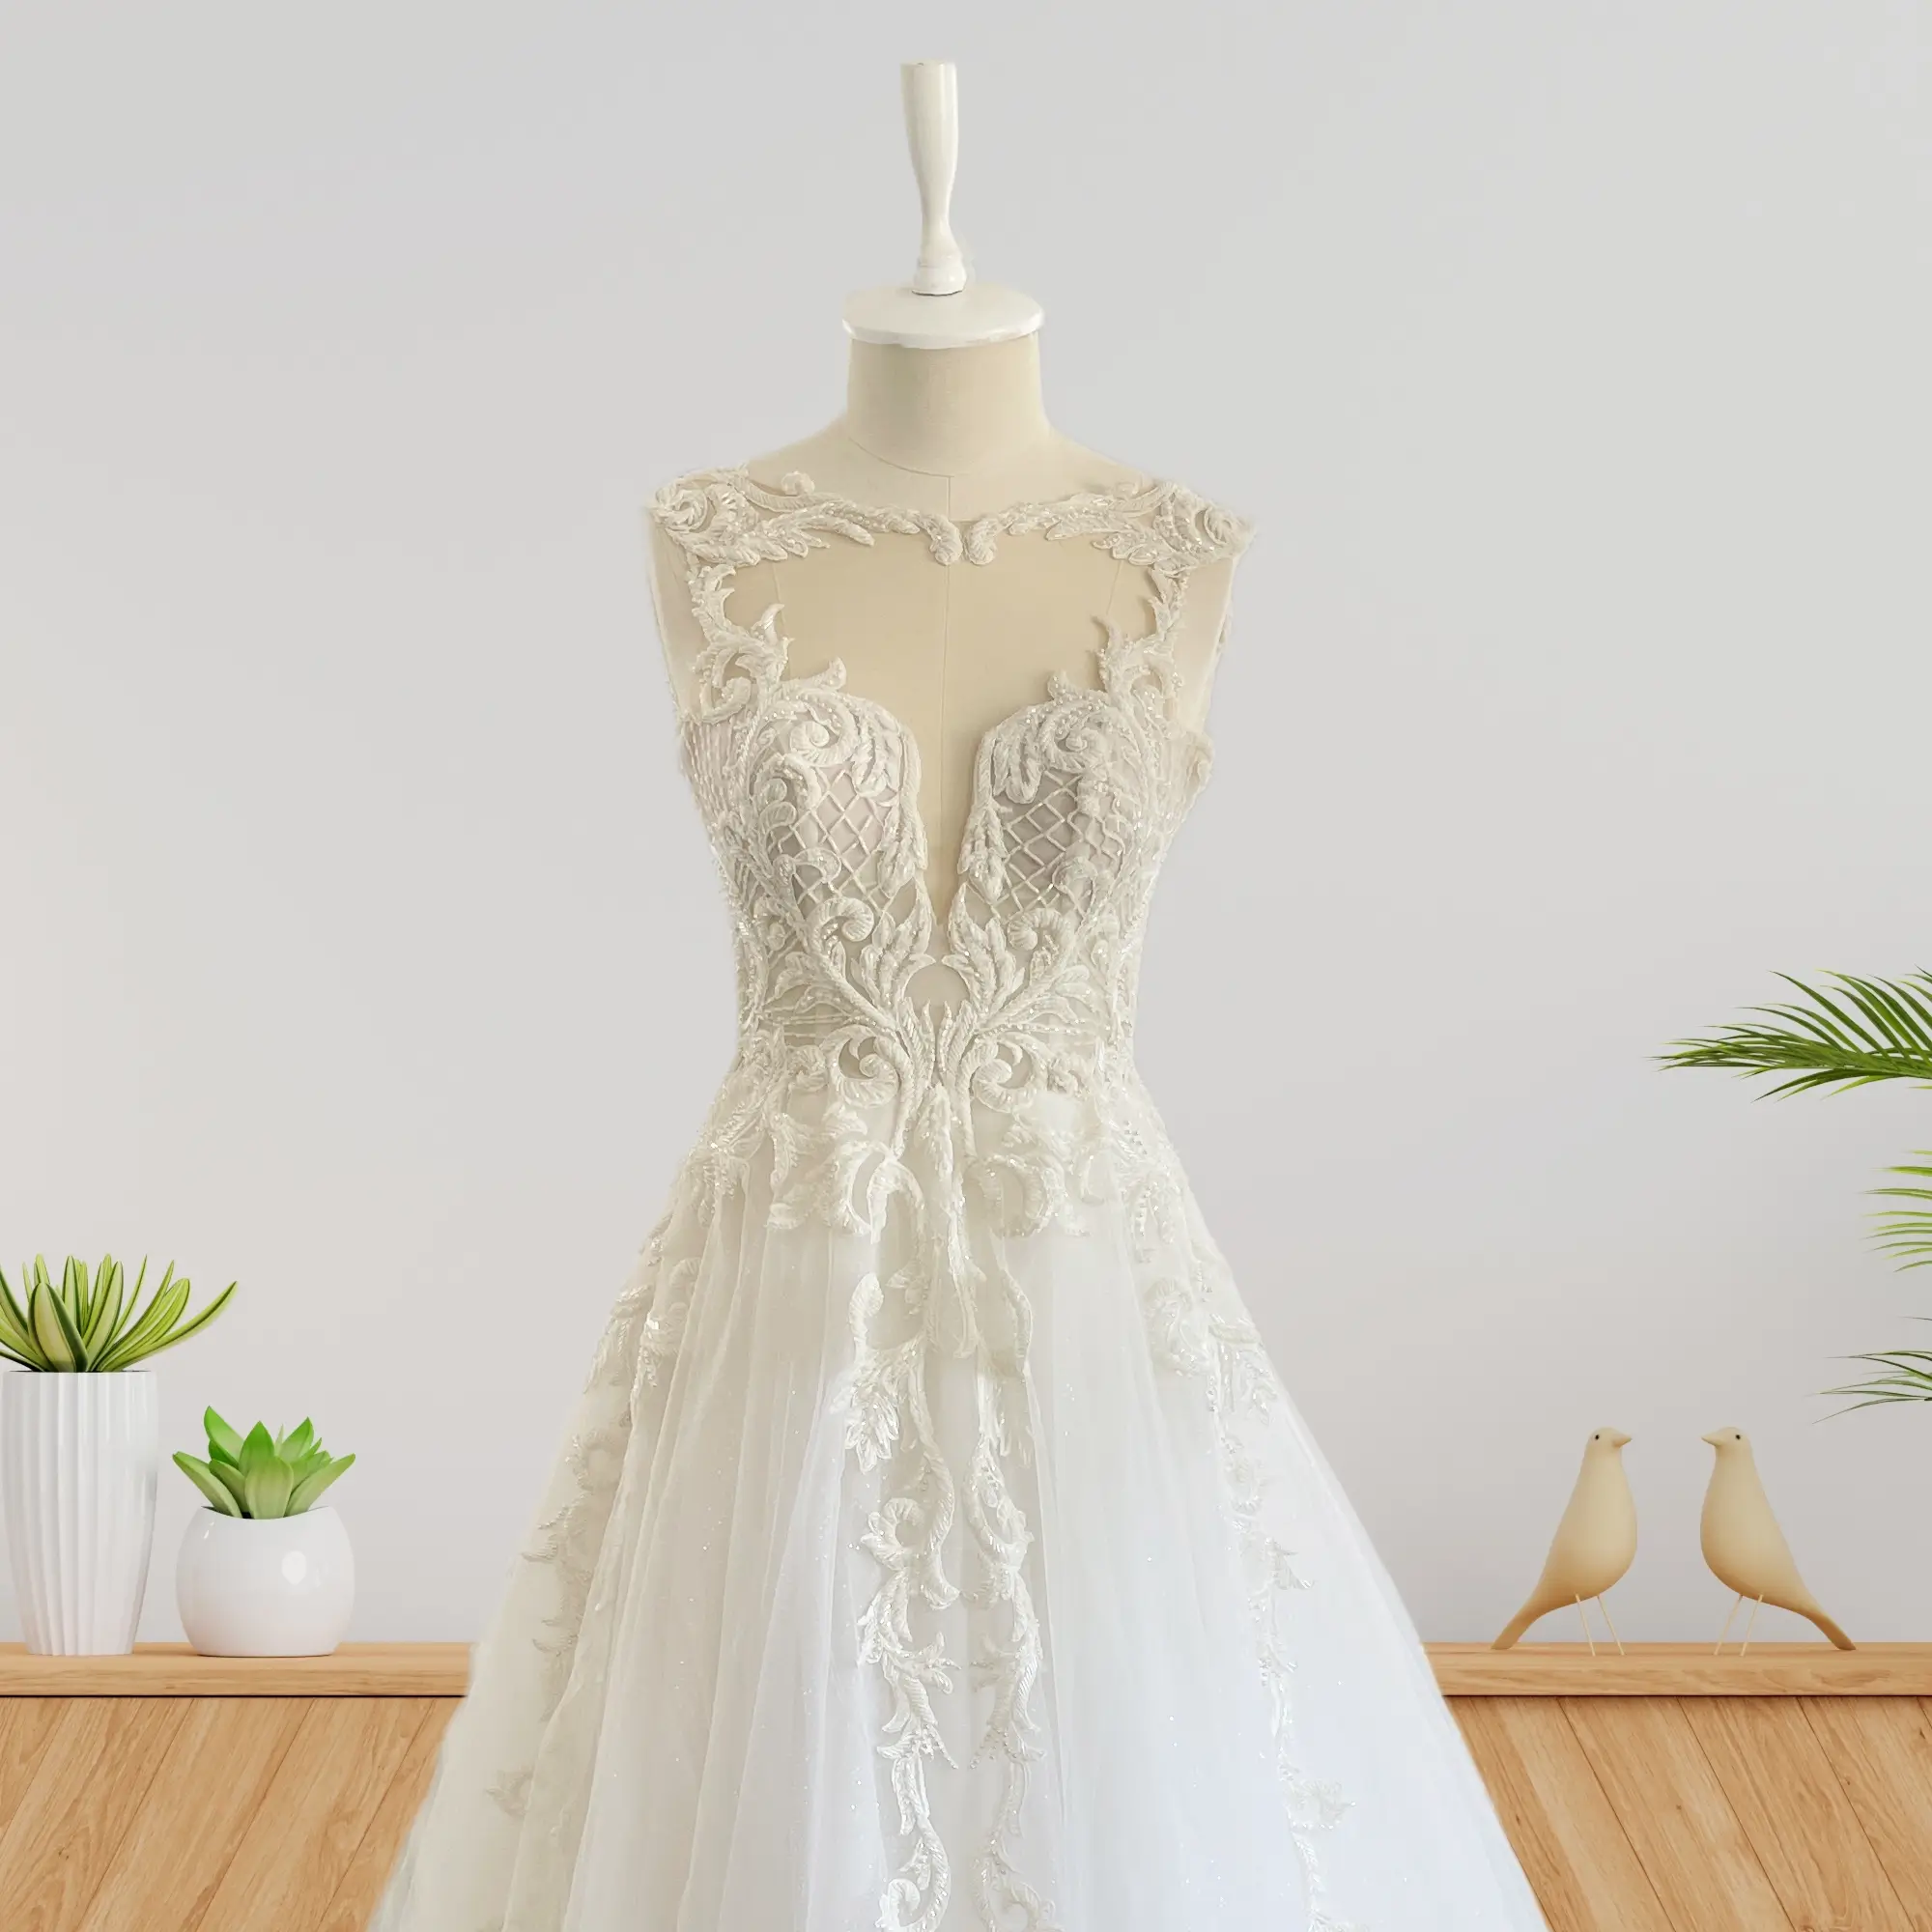 Handmade Bridal Gown with Delicate Lace and Tulle Features